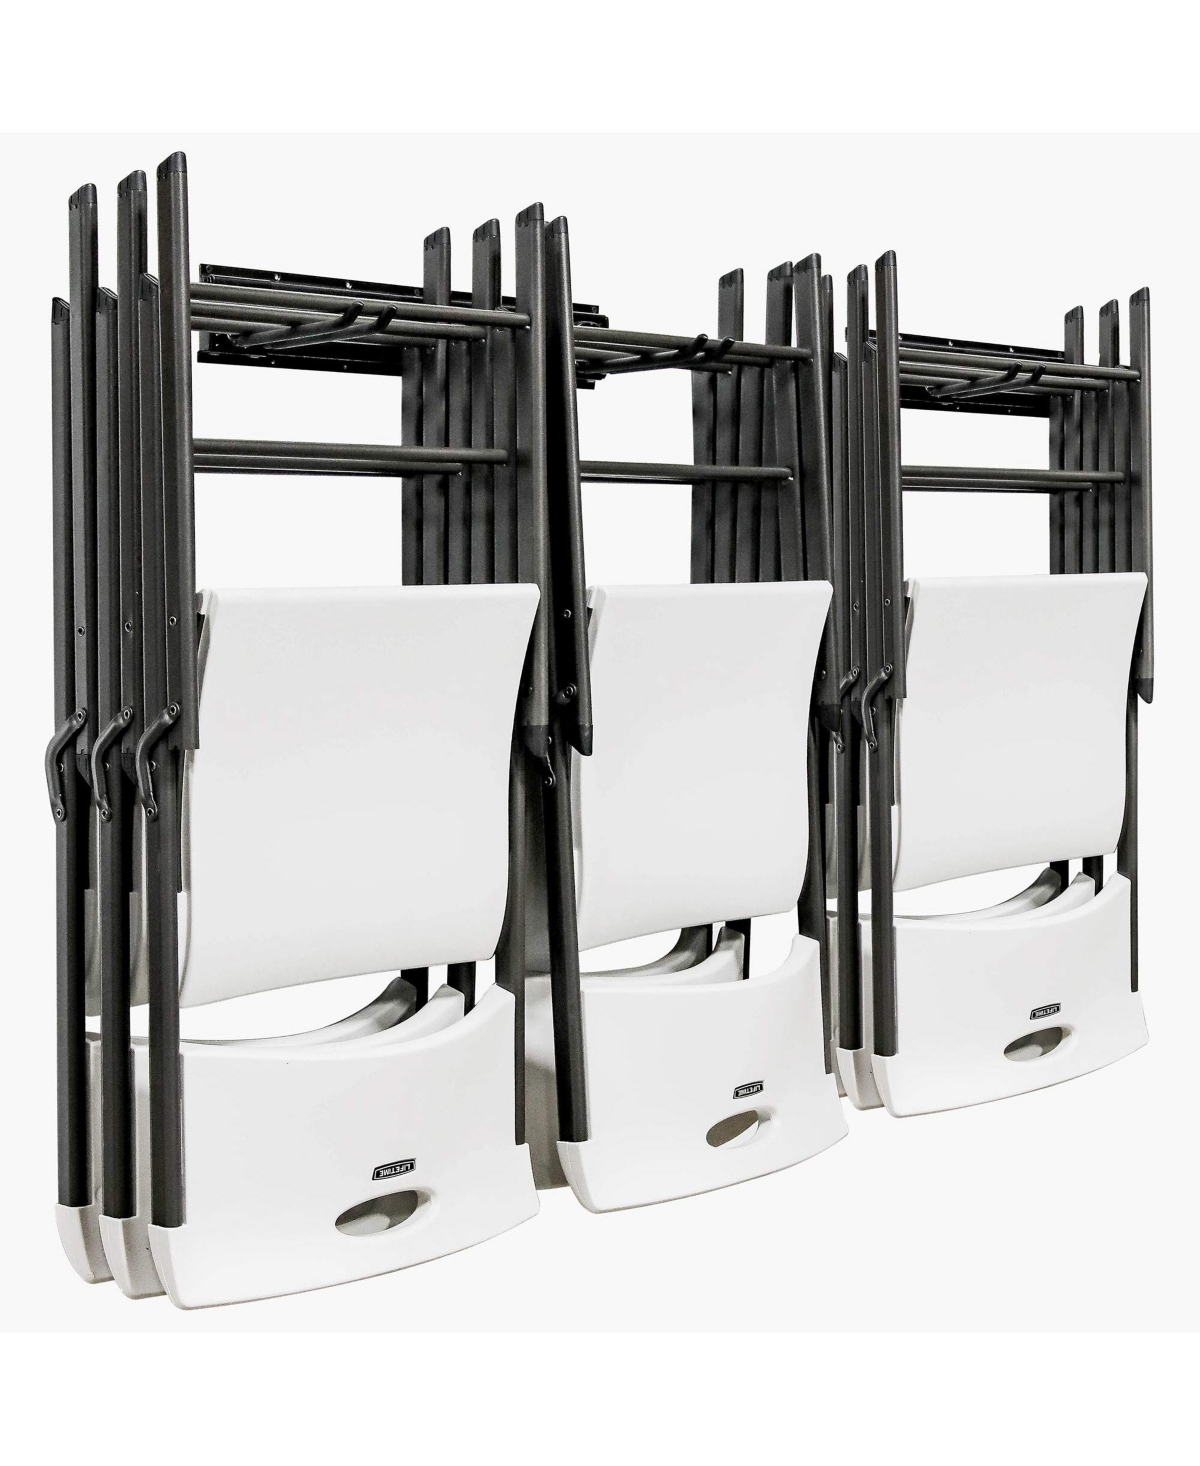 Chair Storage Rack, Mounted Folding Chair Rack and Hanger System - Black